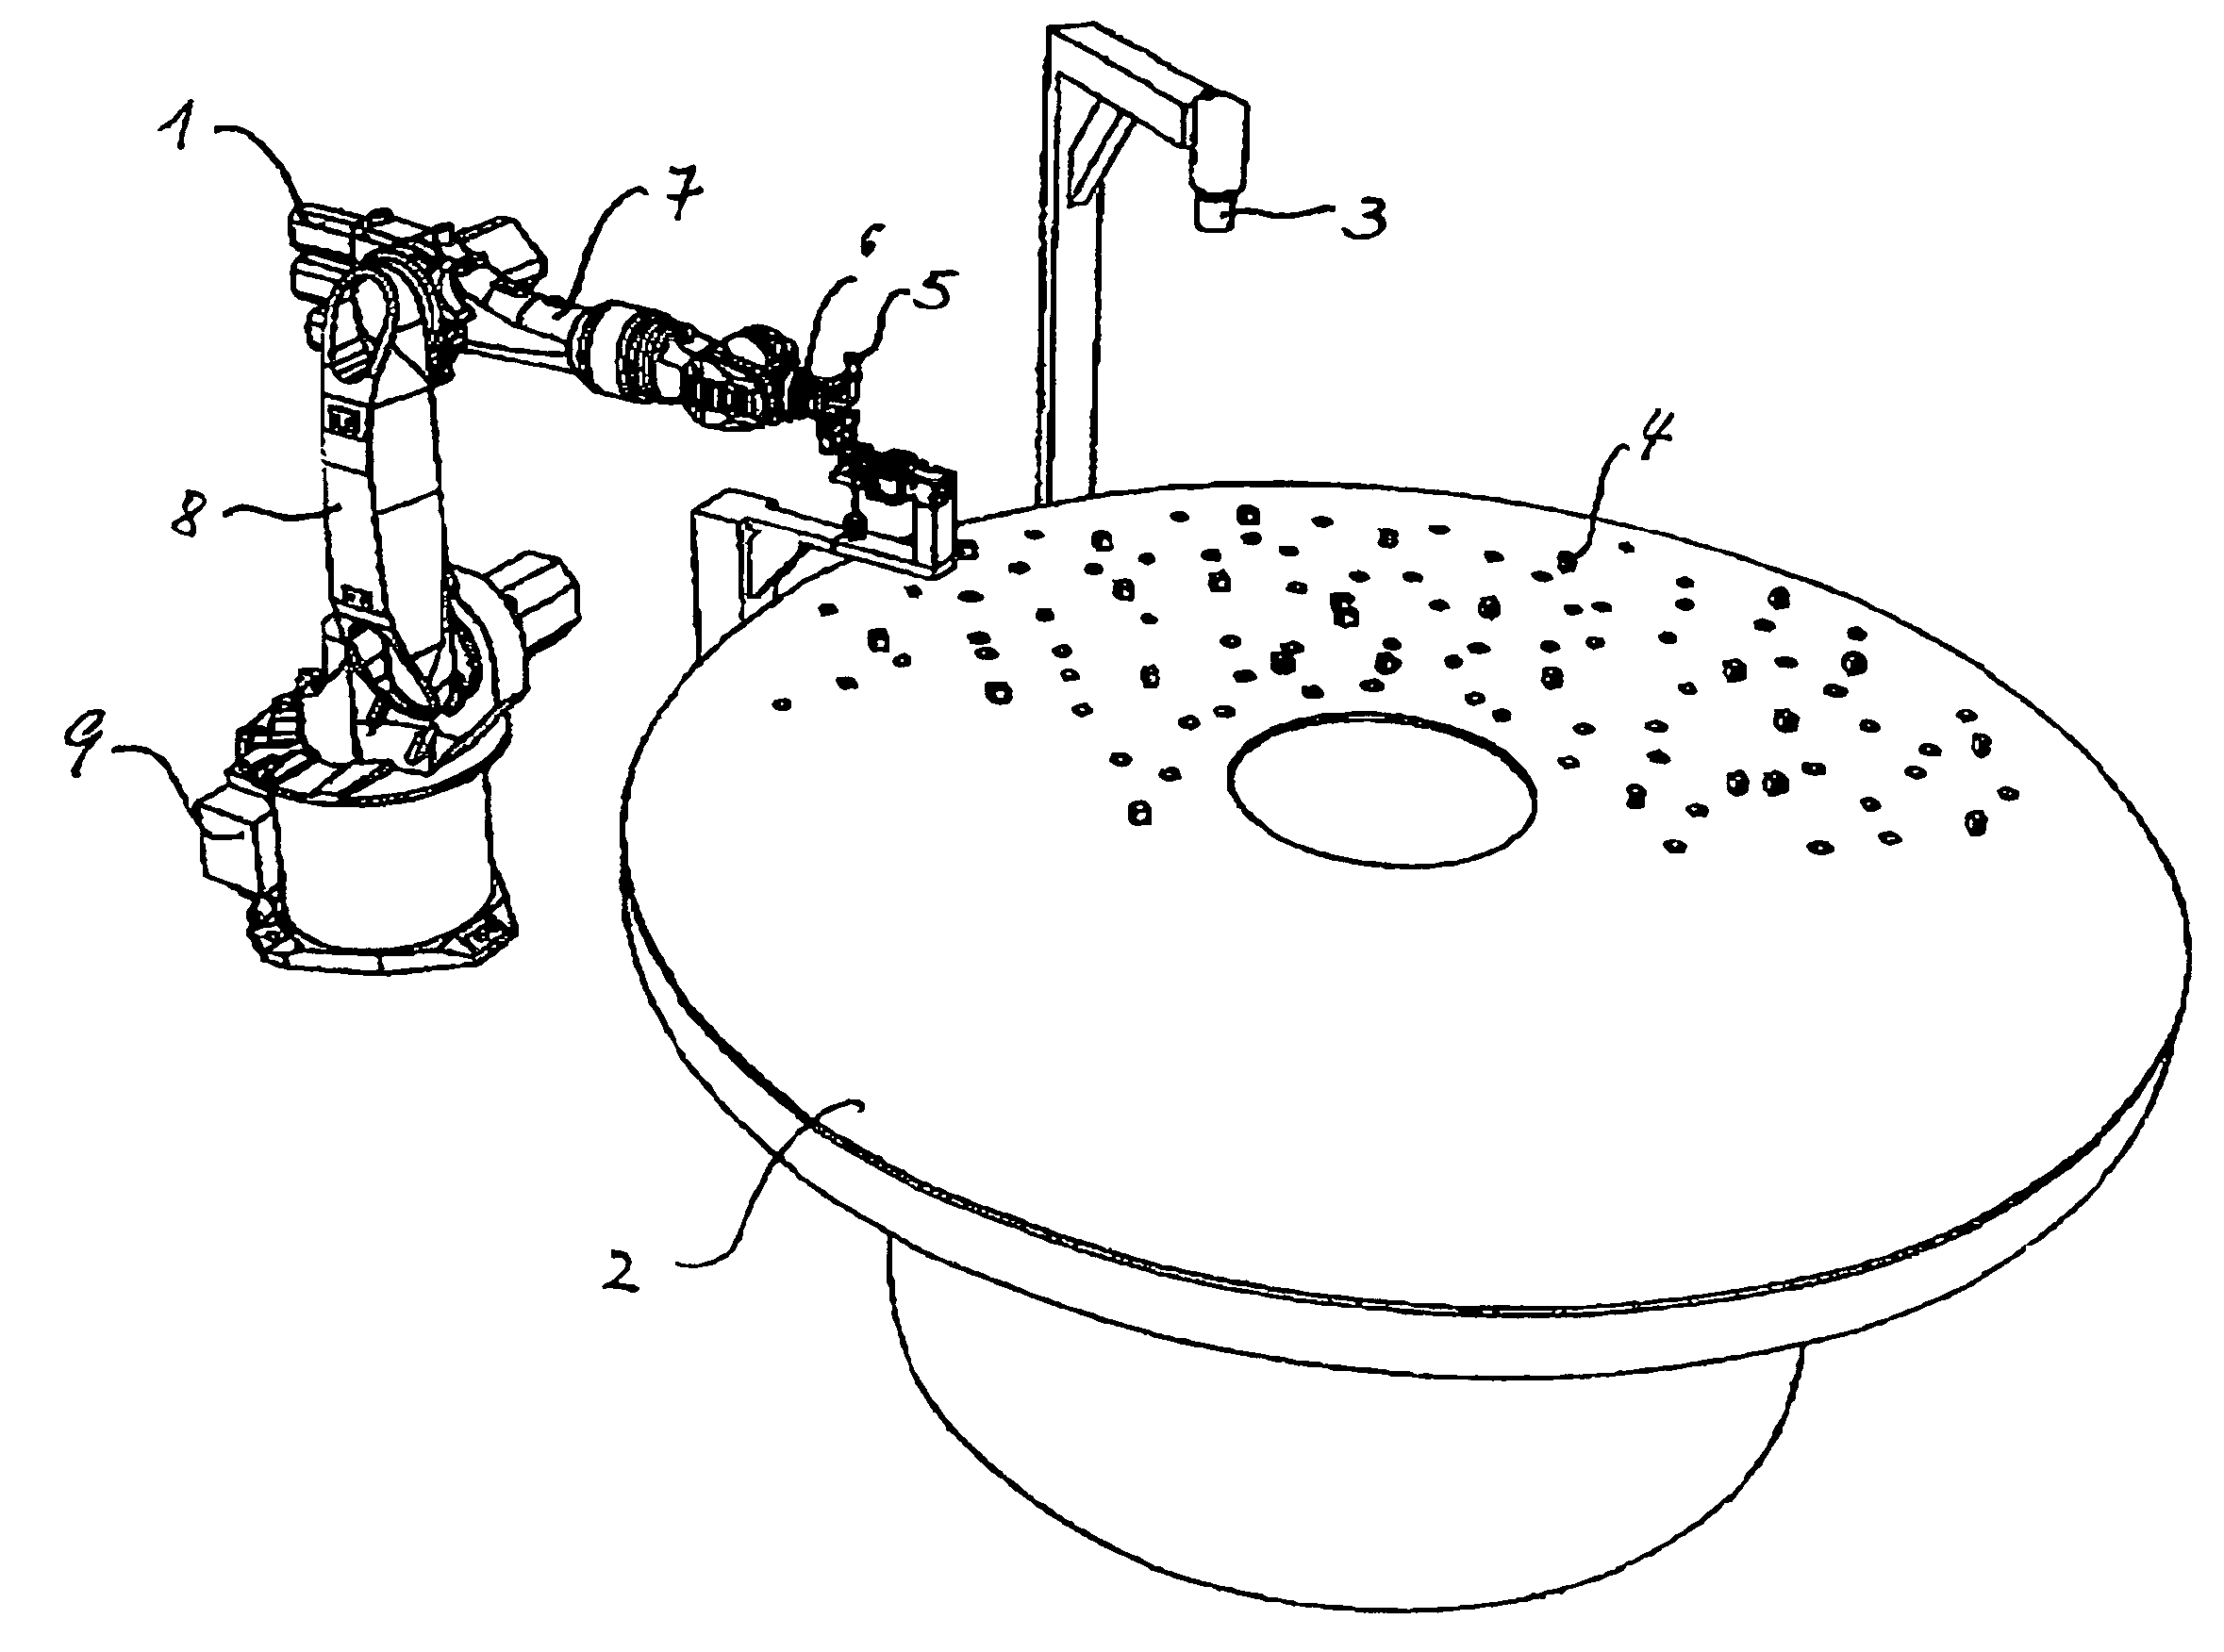 Device and method for preparing brochettes with picked-and-placed food